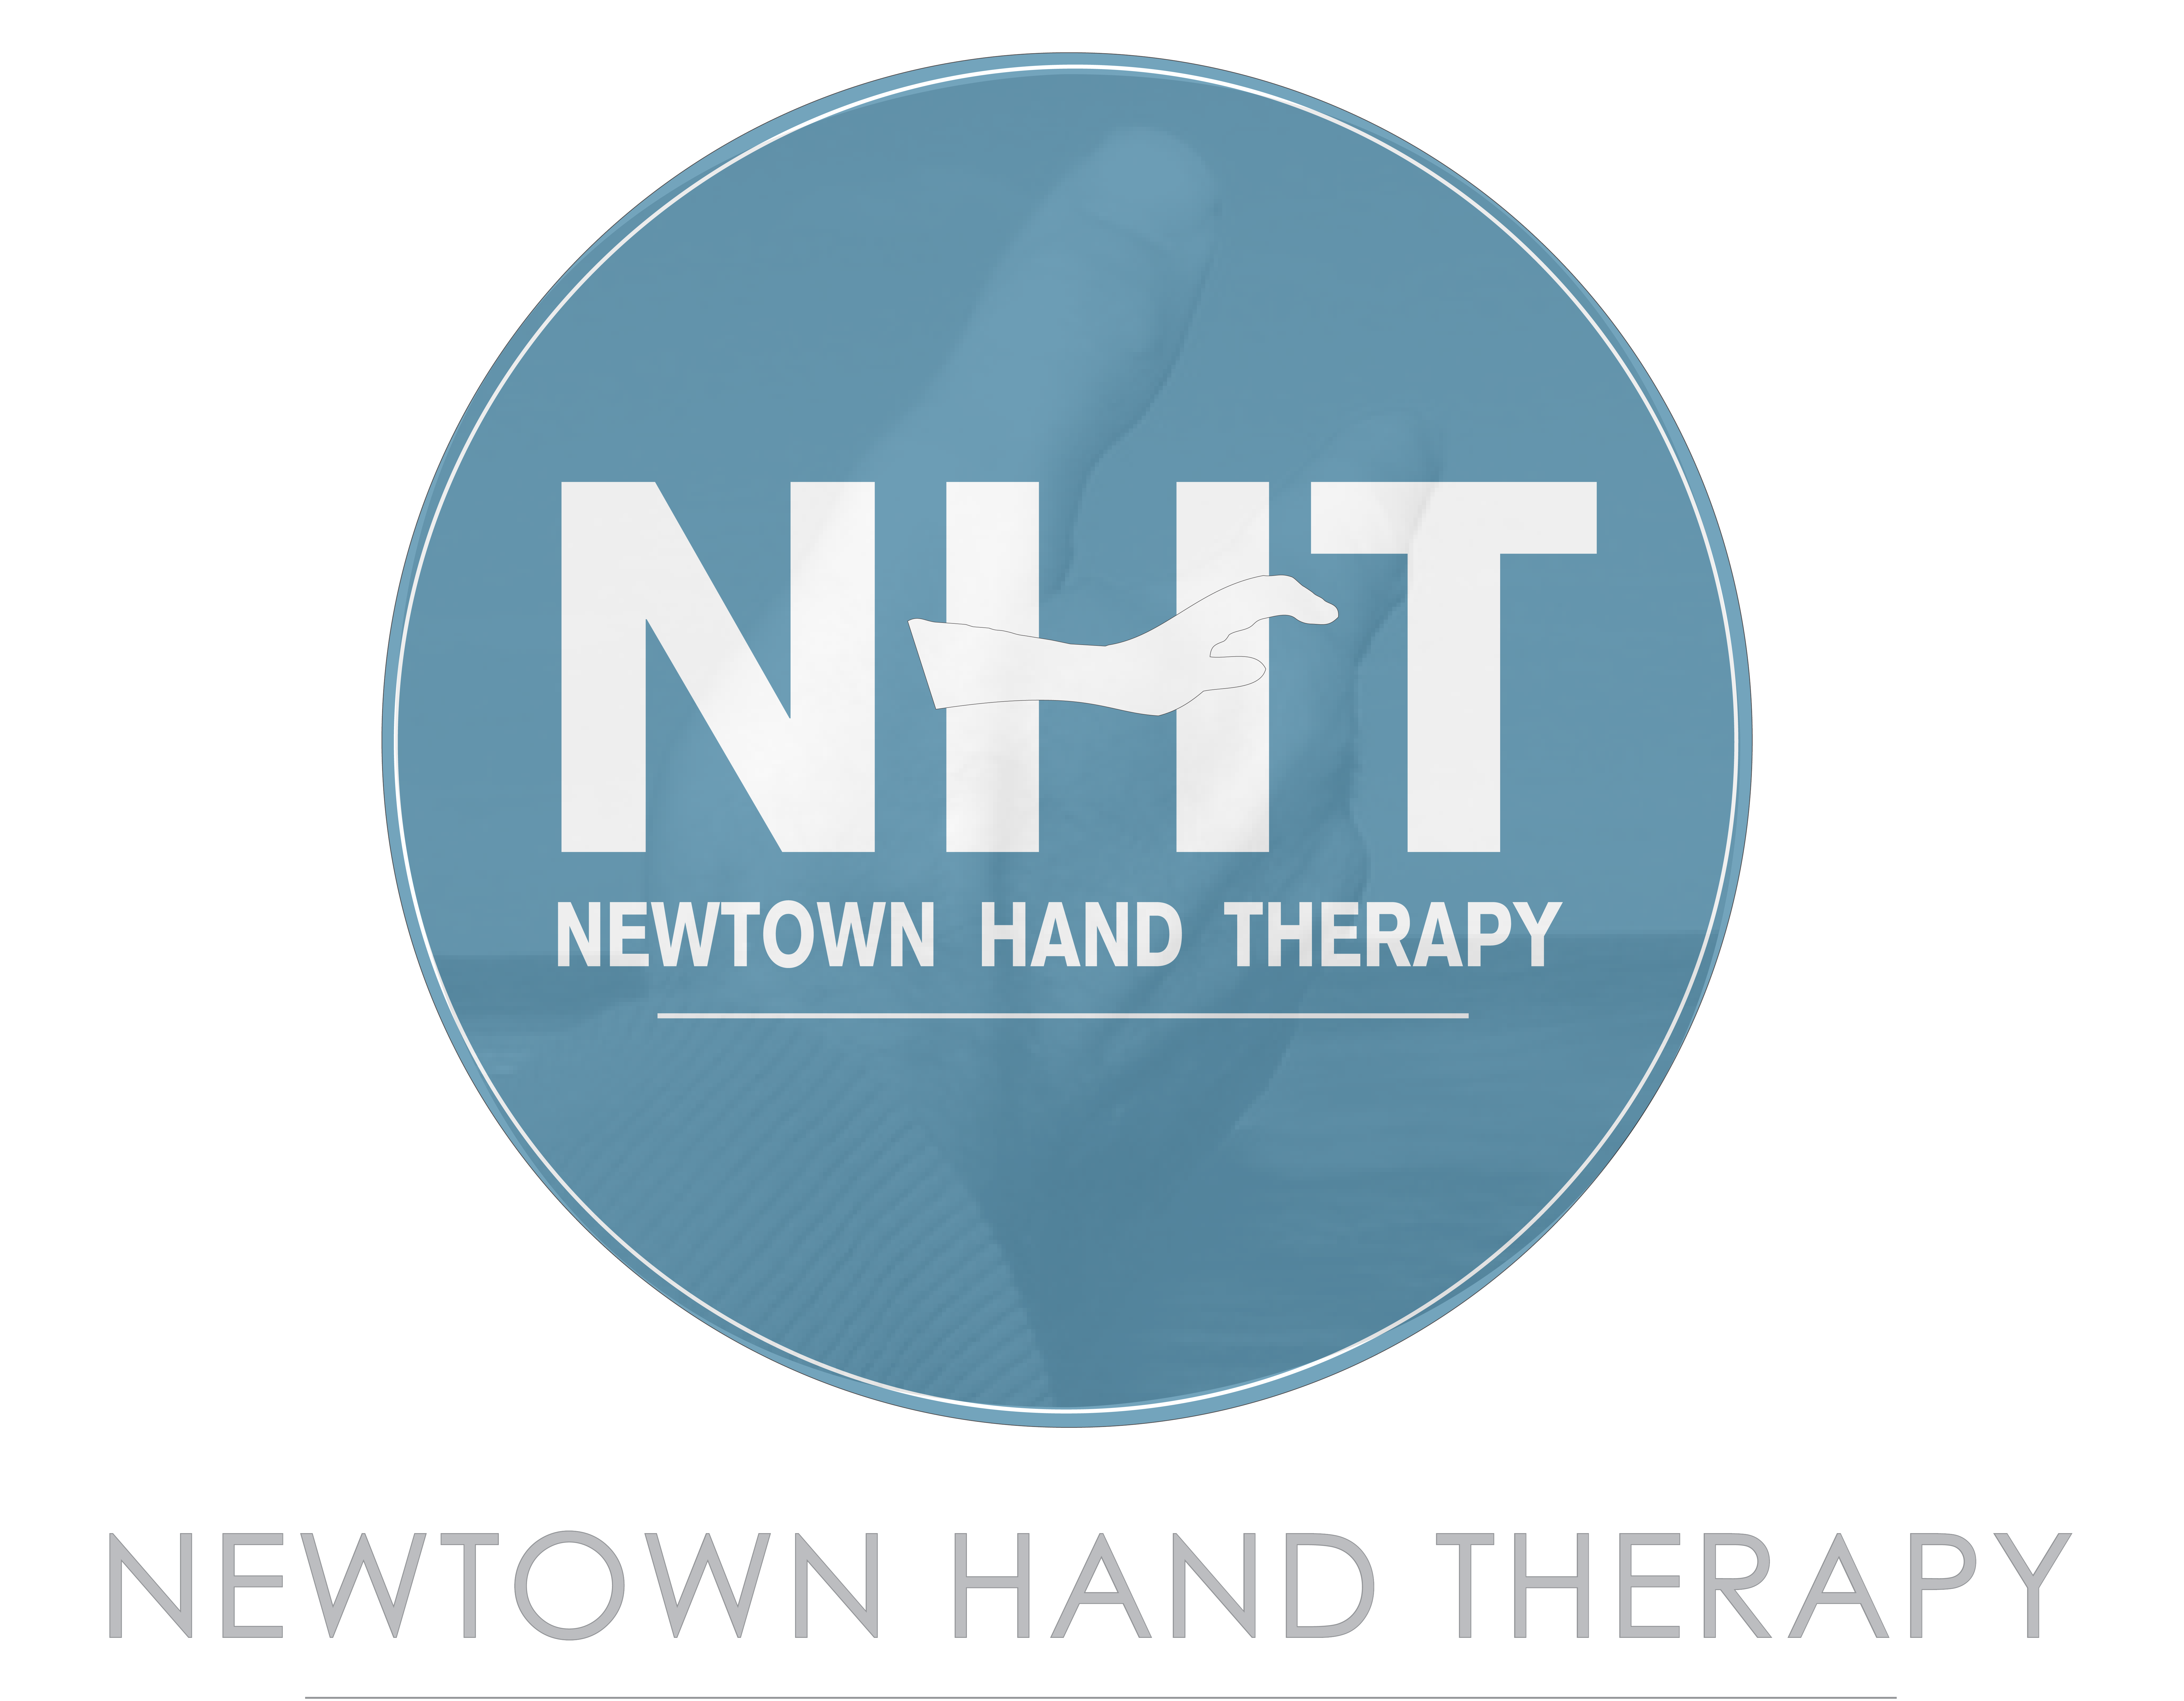    Newtown Hand Therapy